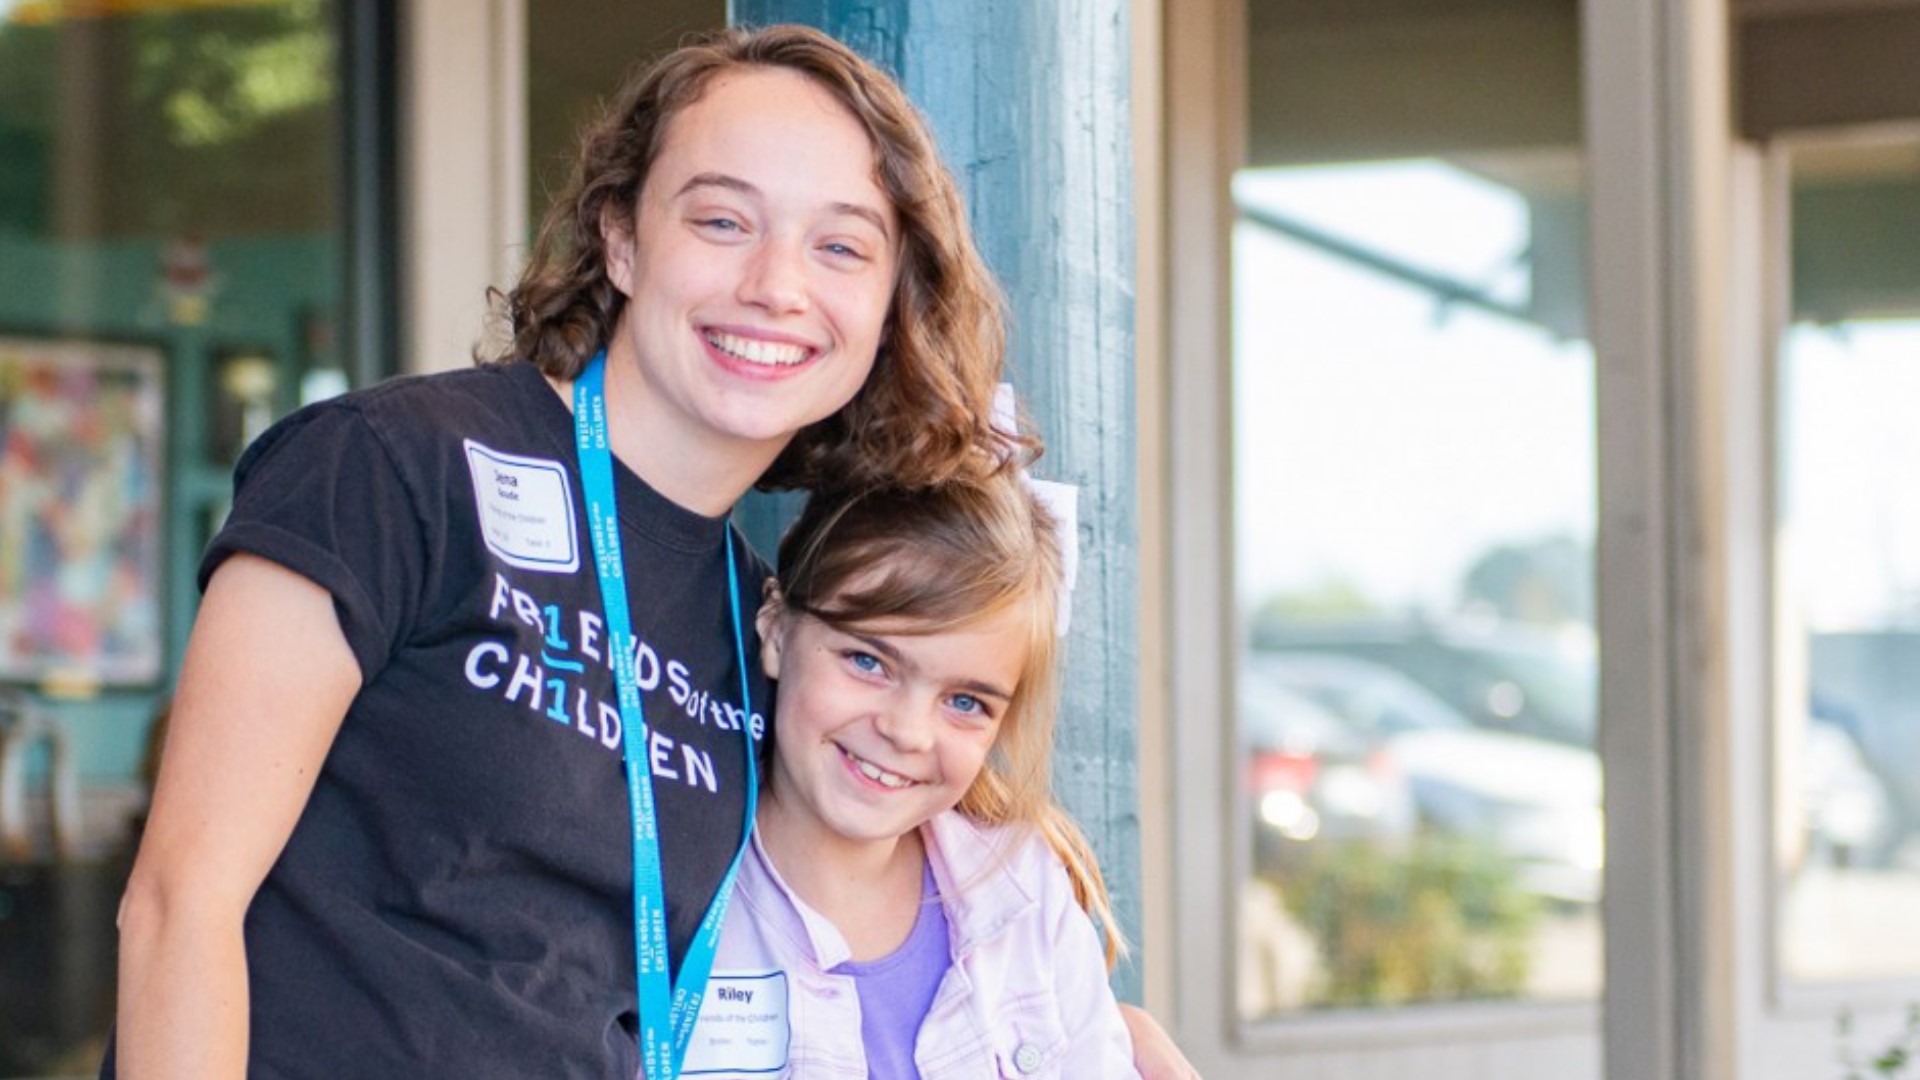 Friends of the Children is a nationwide organization dedicated to breaking the cycle of generational poverty by pairing kids with mentors. Sponsored by Premera.